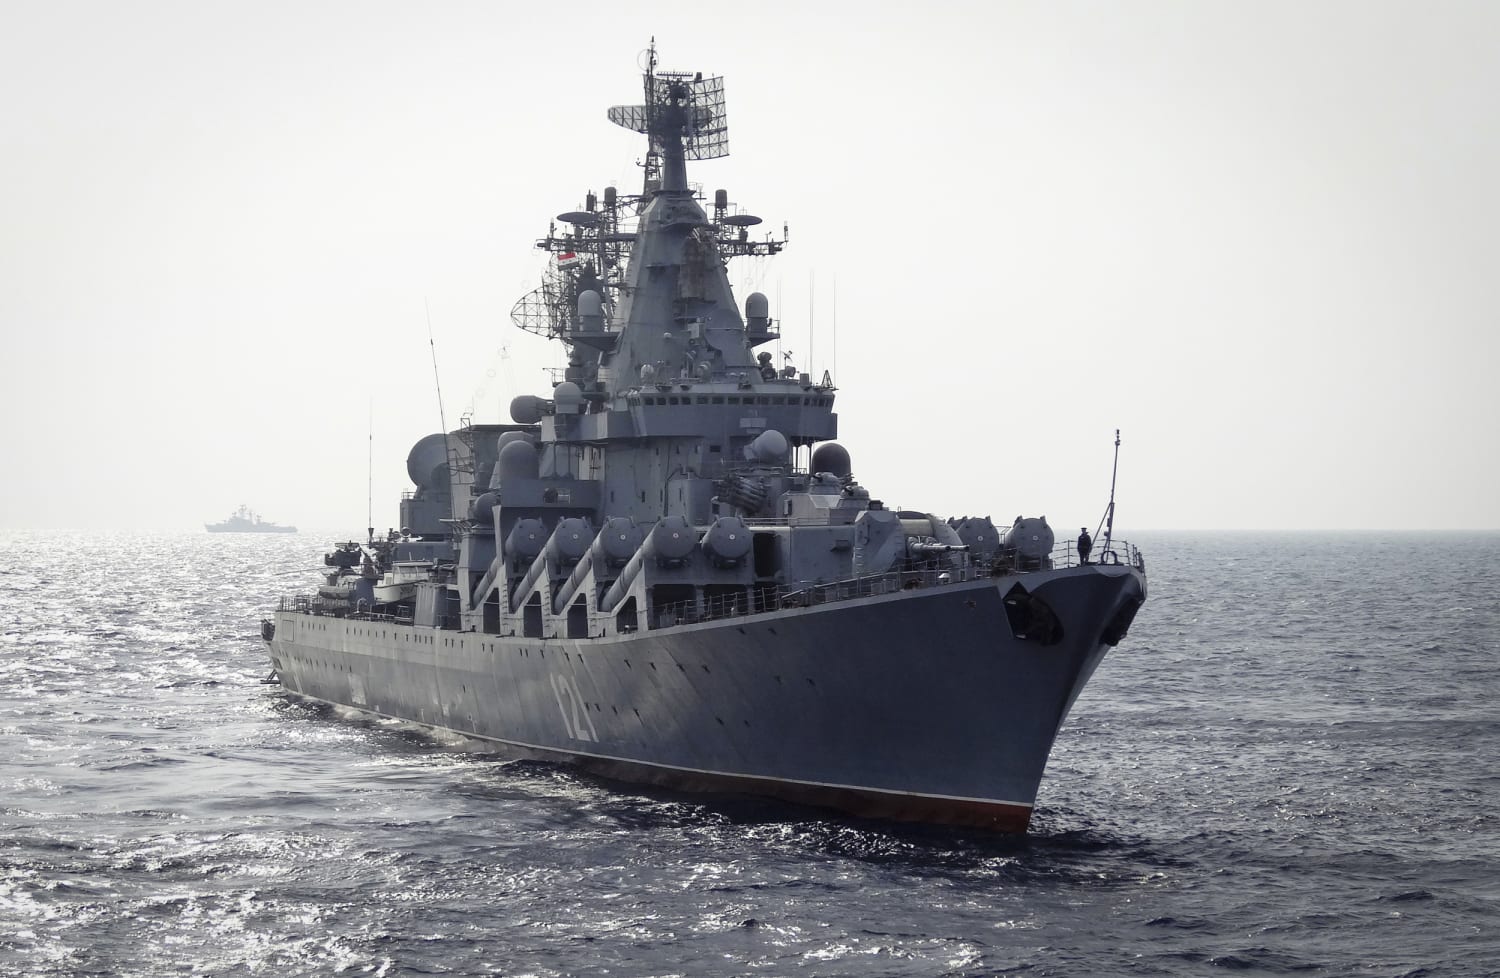 Massive Blow For Russian Credibility Sunk Warship Is A Symbolic Tactical Win For Ukraine